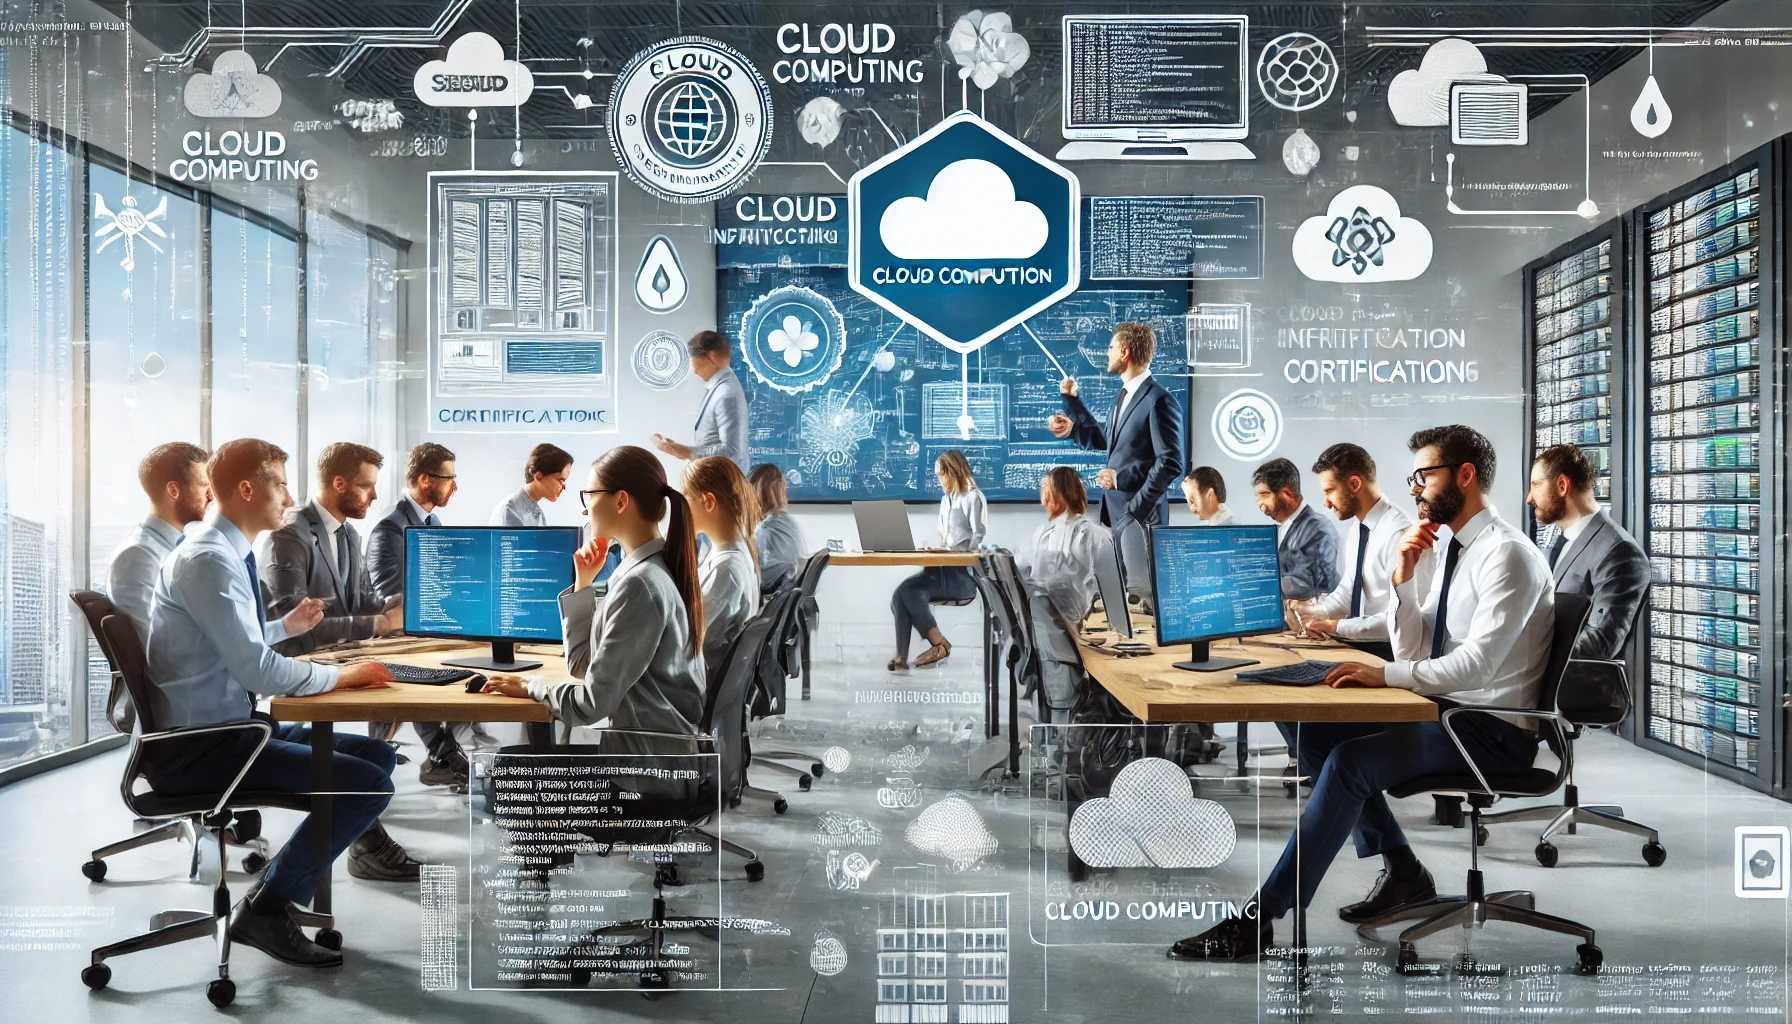 Land Cloud Computing Jobs: Cloud Certifications and Skills to Get